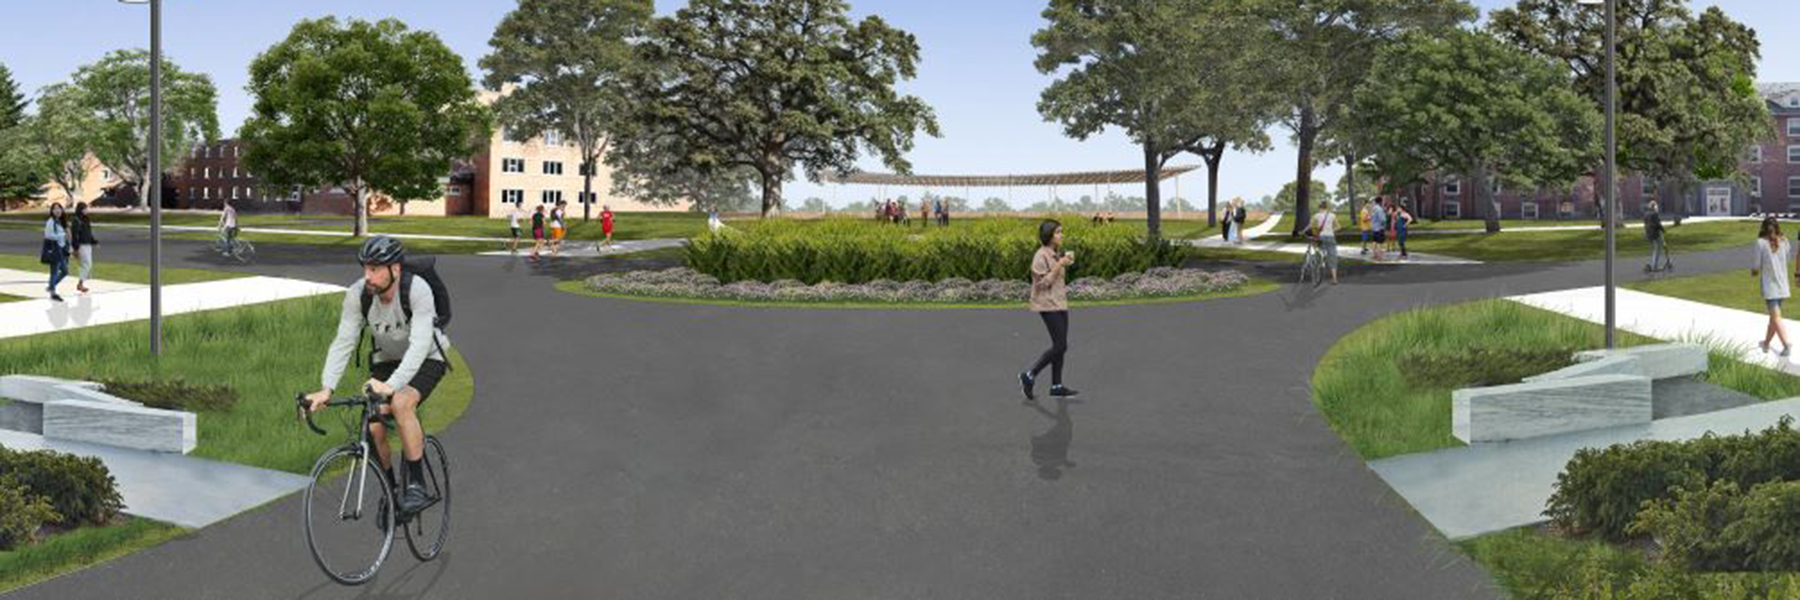 Artist rendering of students on campus with green space